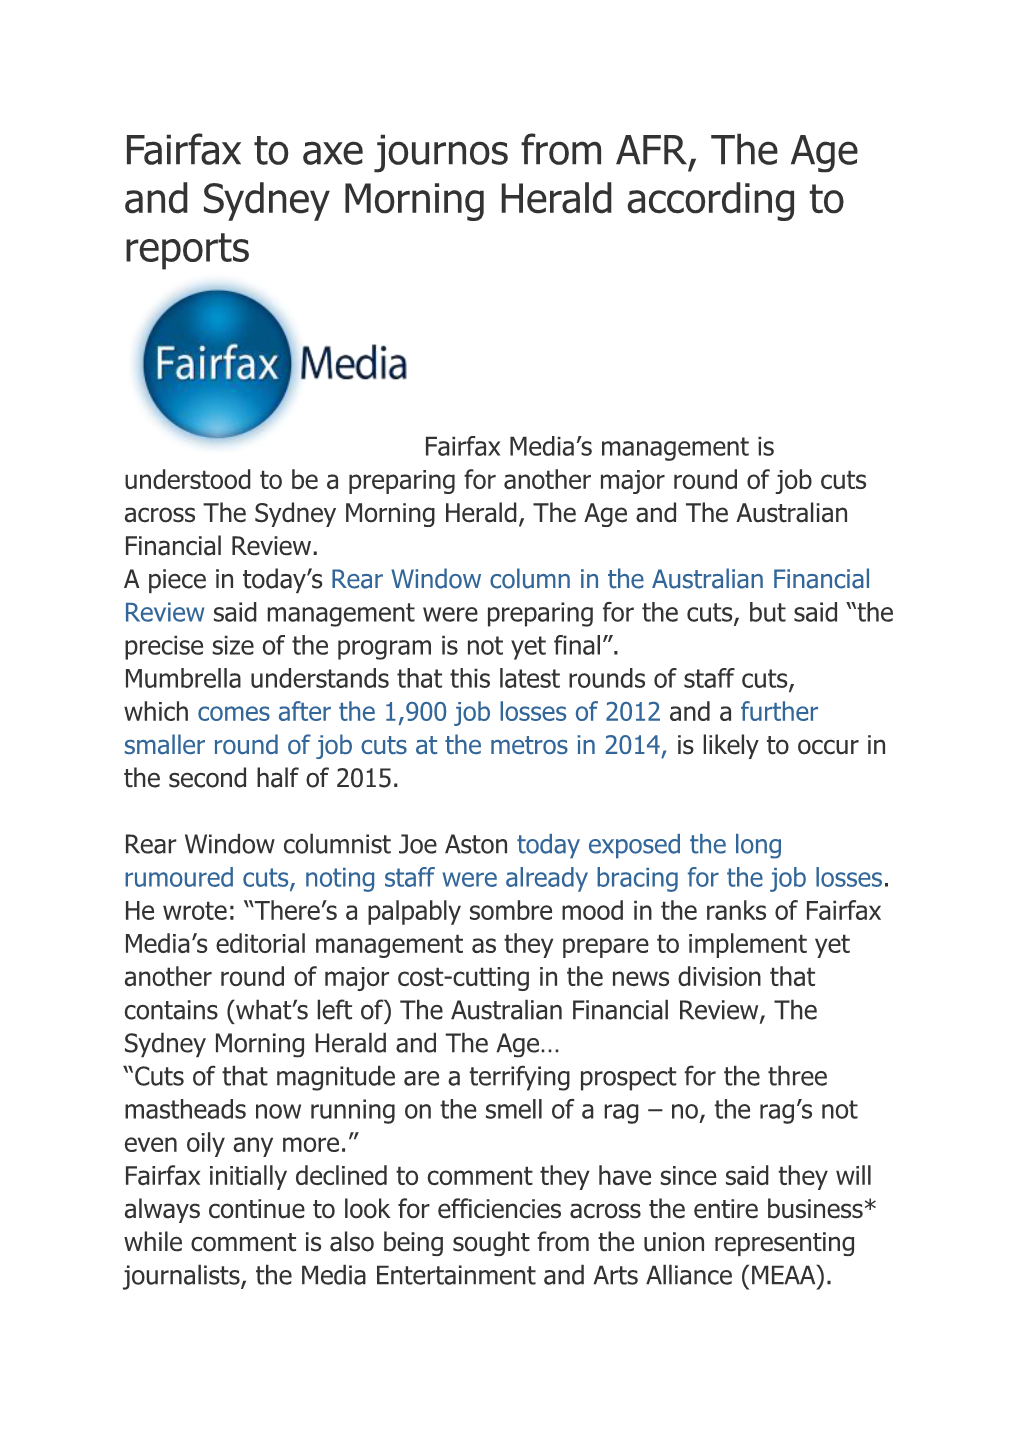 Fairfax to Axe Journos from AFR, the Age and Sydney Morning Herald According to Reports